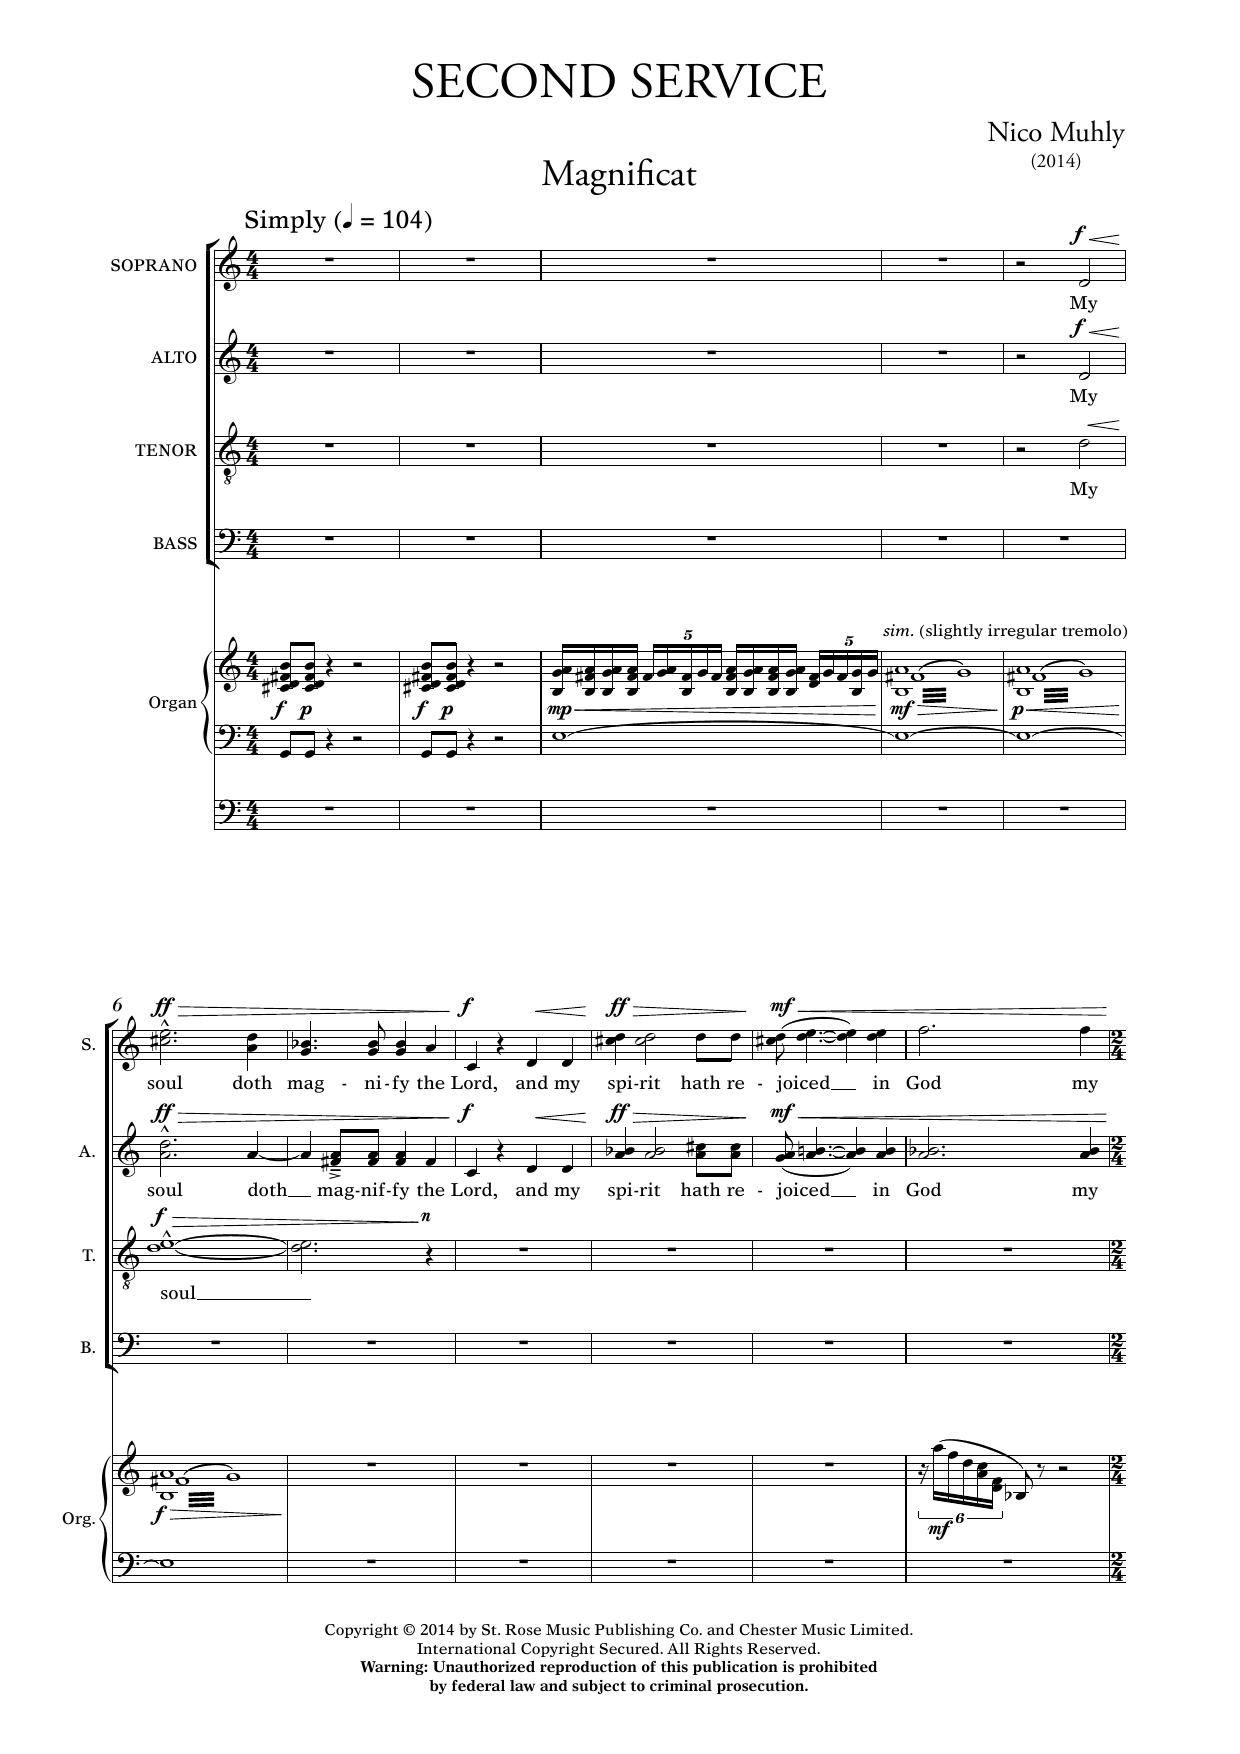 Download Nico Muhly Second Service (Magnificat and Nunc Dim Sheet Music